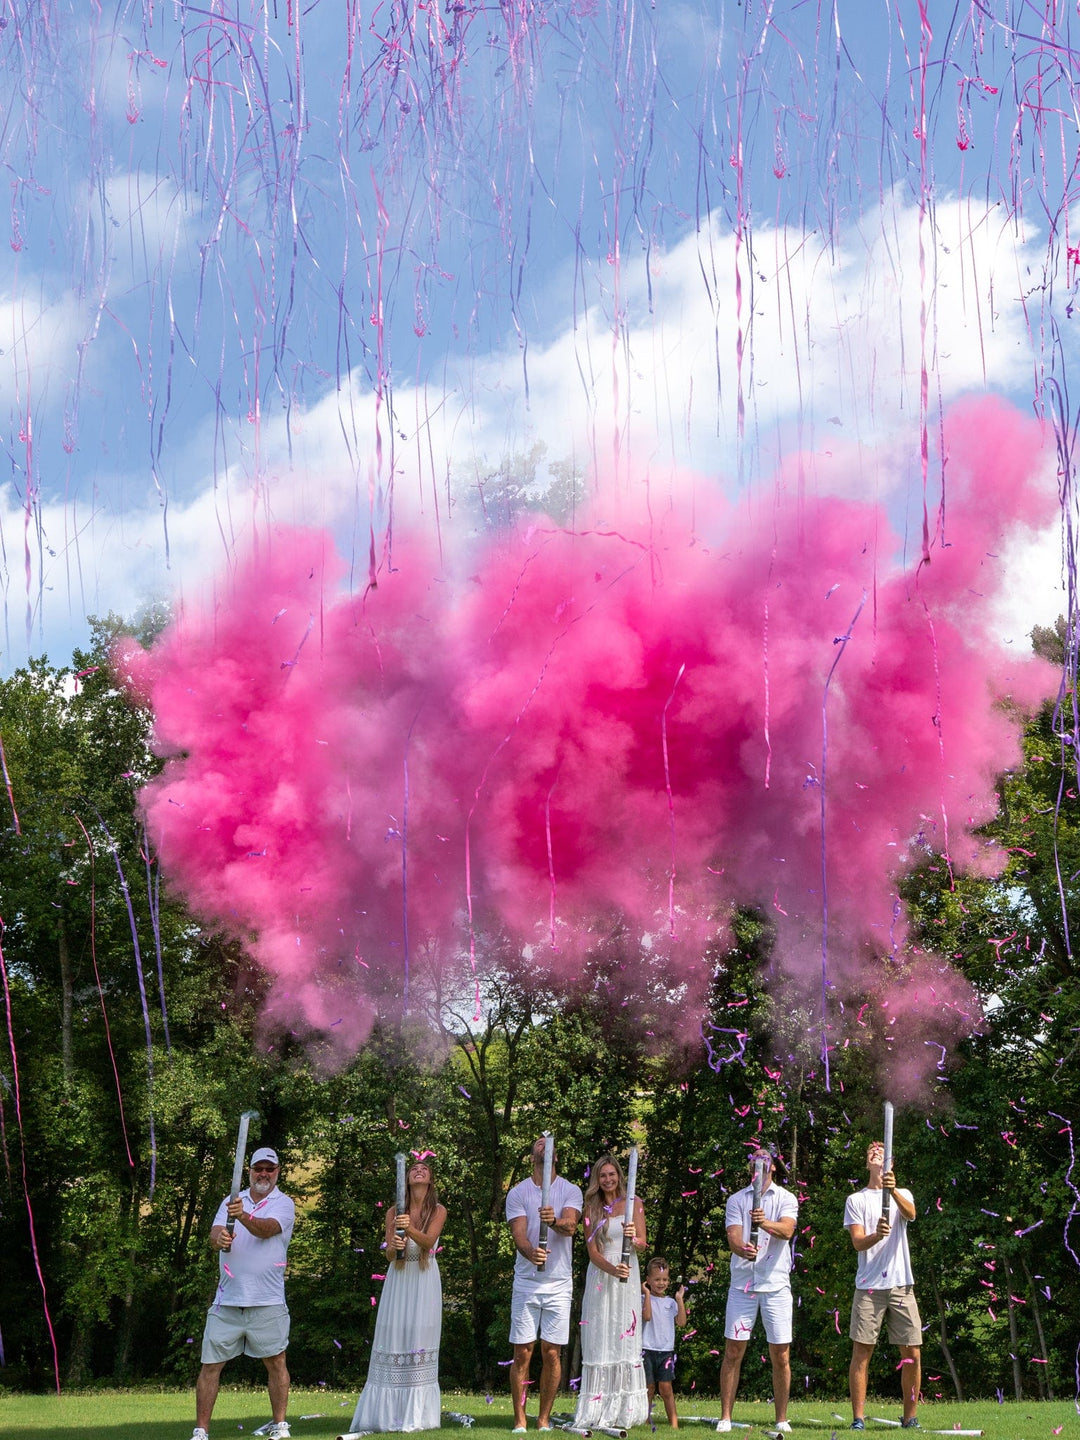 Poof There It Is Cannons Streamer Gender Reveal Cannons